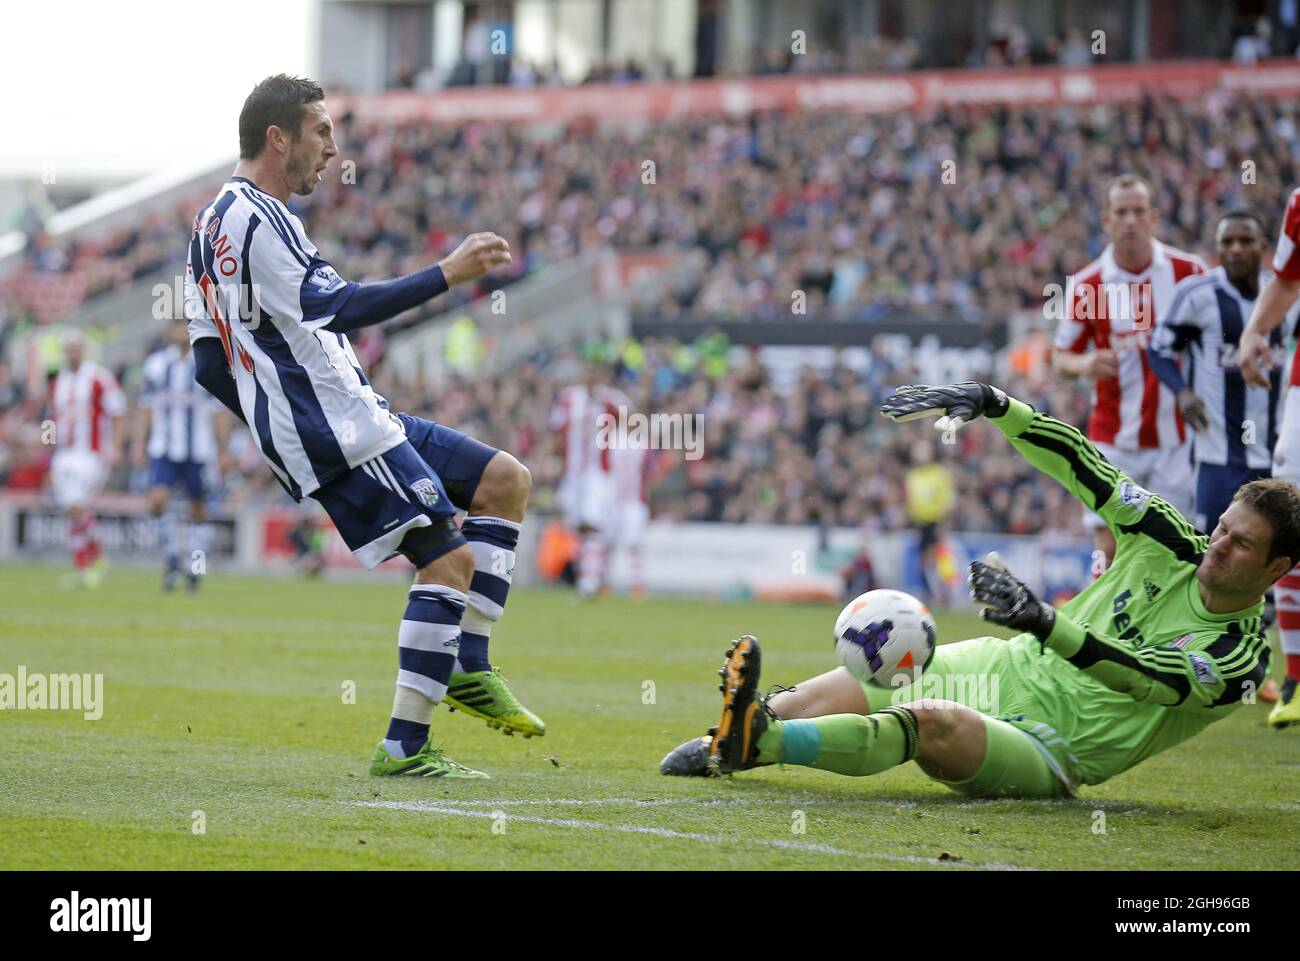 Morgan Amalfitano of West Bromwich brings a point blank save from Stoke goalkeeper Asmir Begovic during the Barclays Premier League Football match between Stoke City and West Bromwich Albion held at Britannia Stadium in Stoke, UK on 19th October 2013. Photo by: Malcolm Couzens. Stock Photo